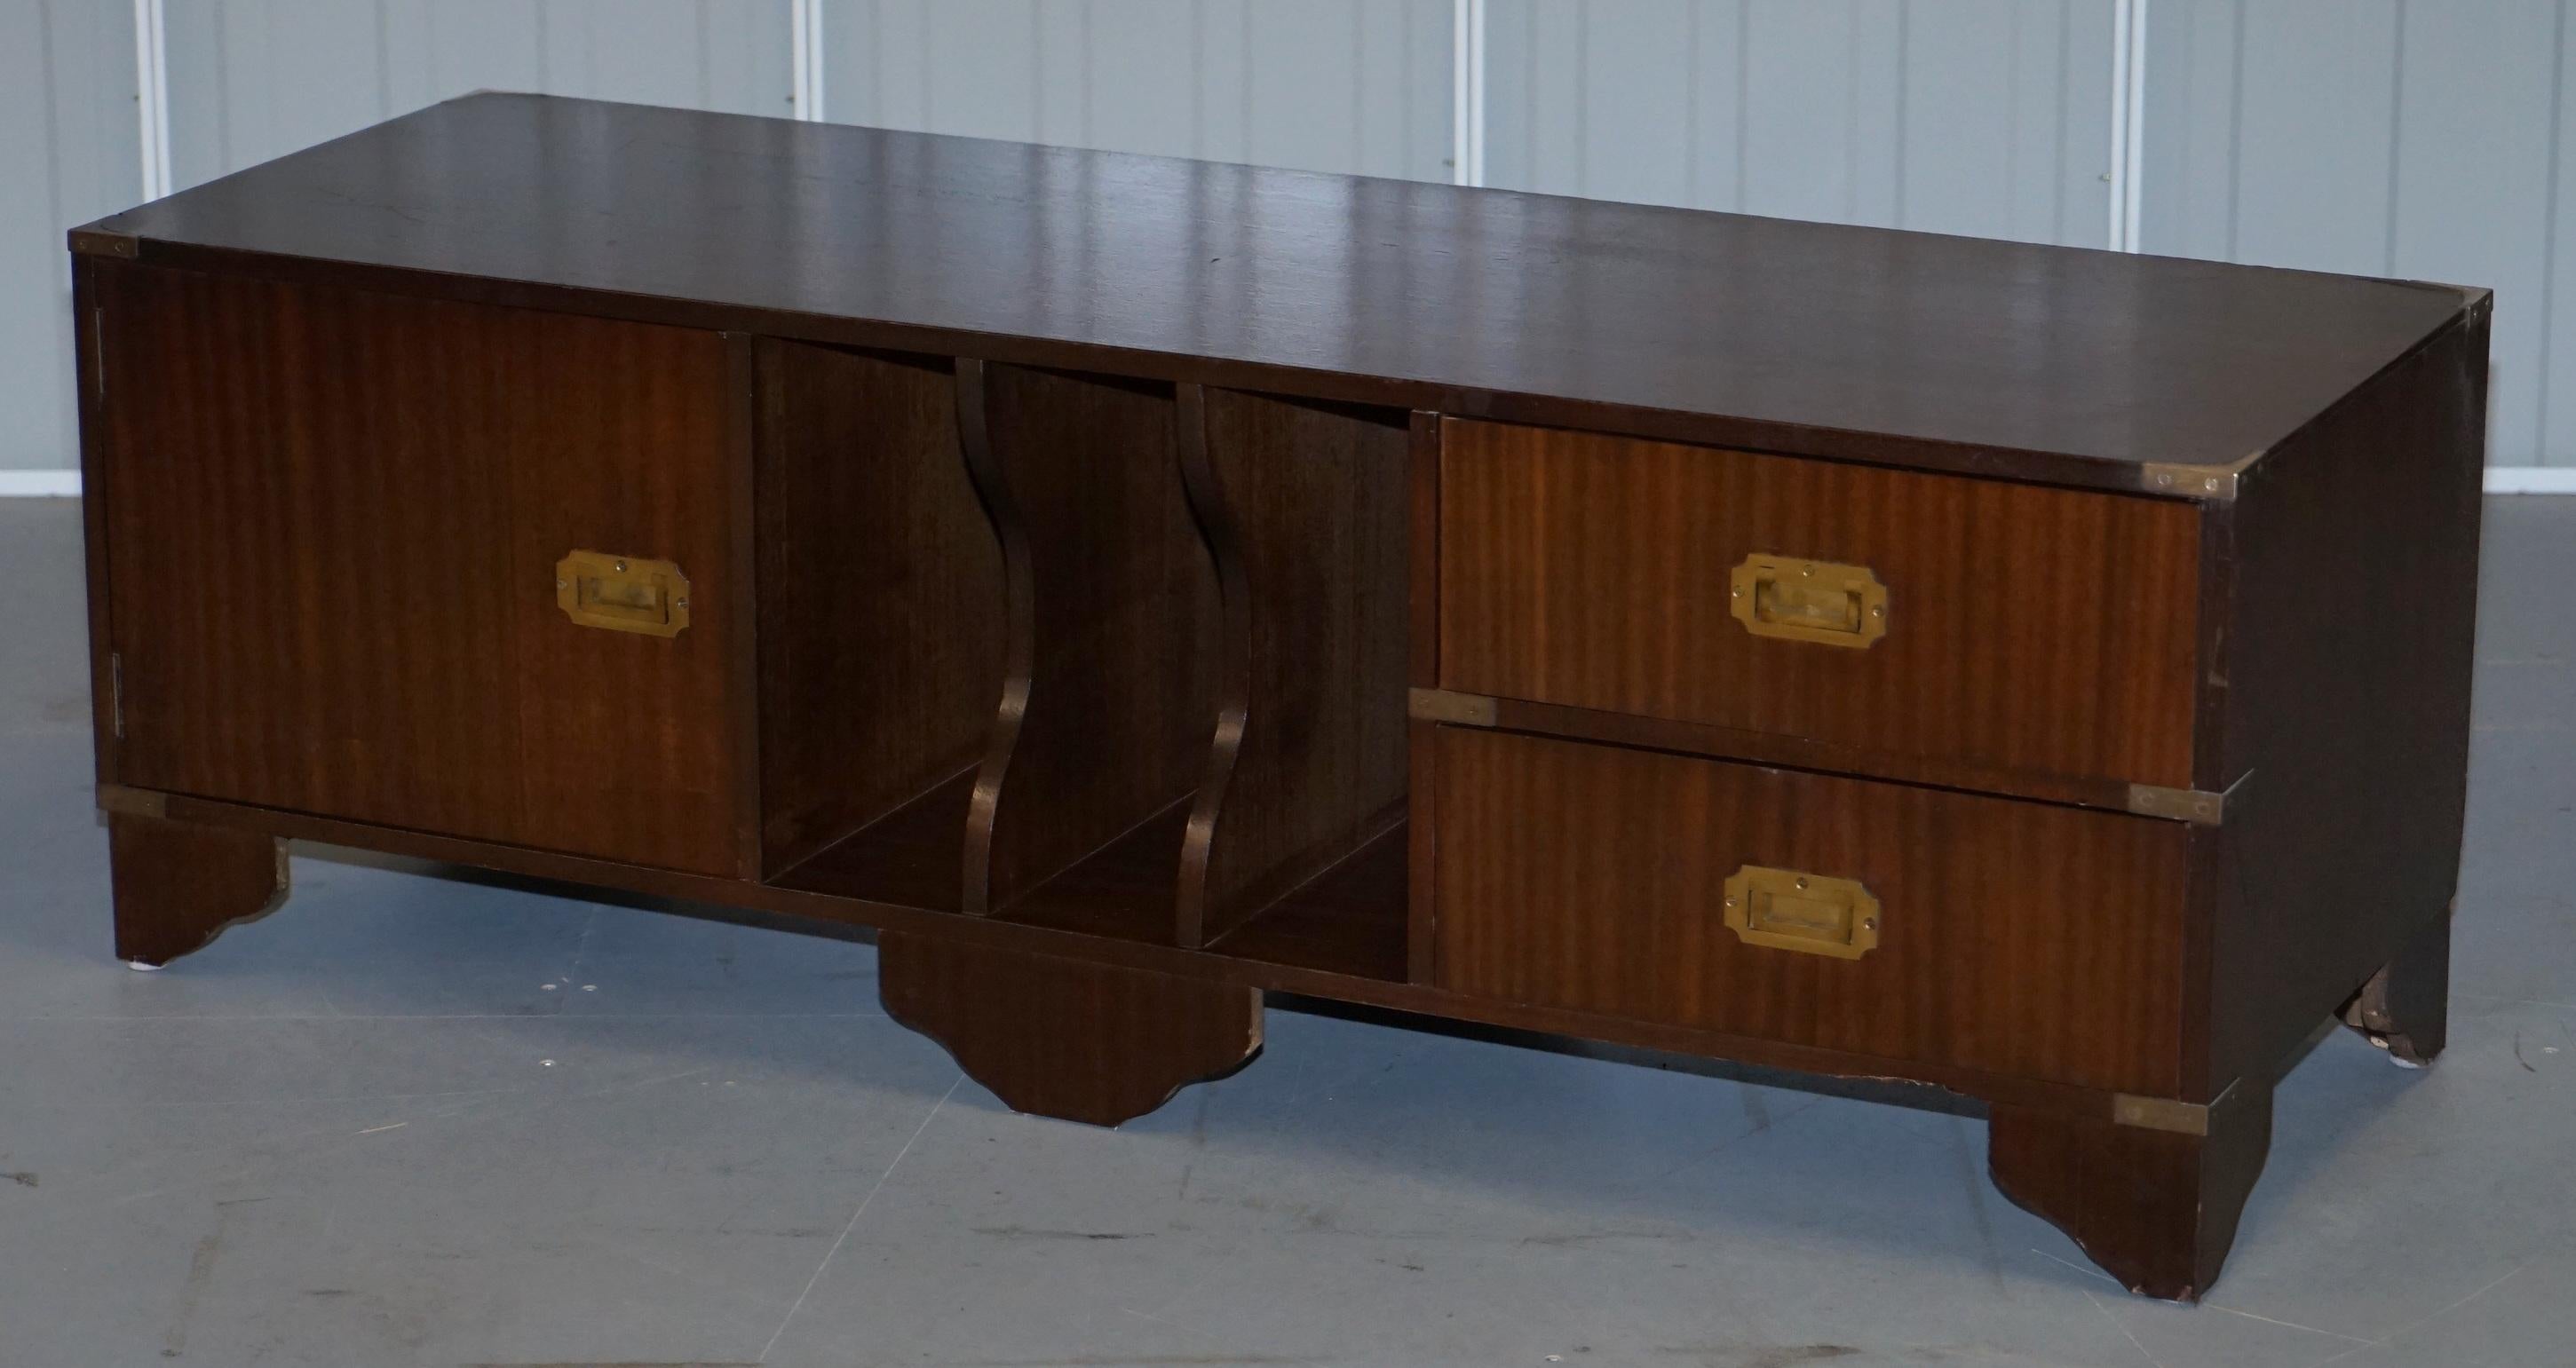 We are delighted to offer for sale this nice vintage Bevan Funnell Military Campaign media table with drawers

A very good looking and well made piece, originally designed as a media cabinet so it could house a record player and seat a television